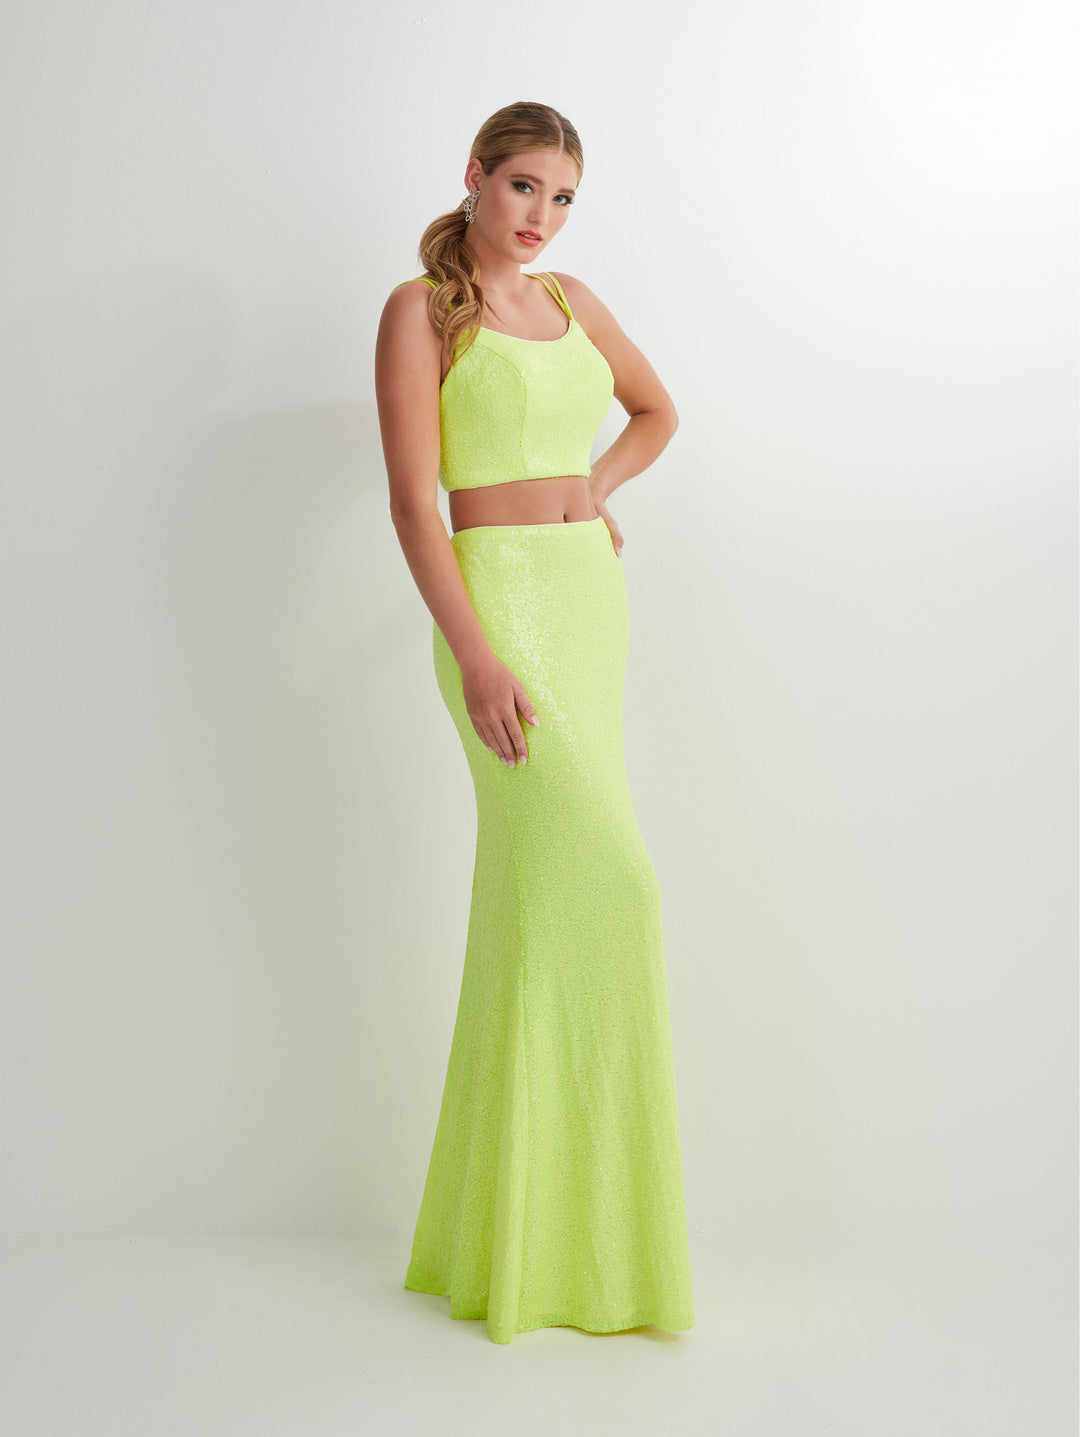 Sequin Lace-Up Back Two Piece Gown by Studio 17 12886